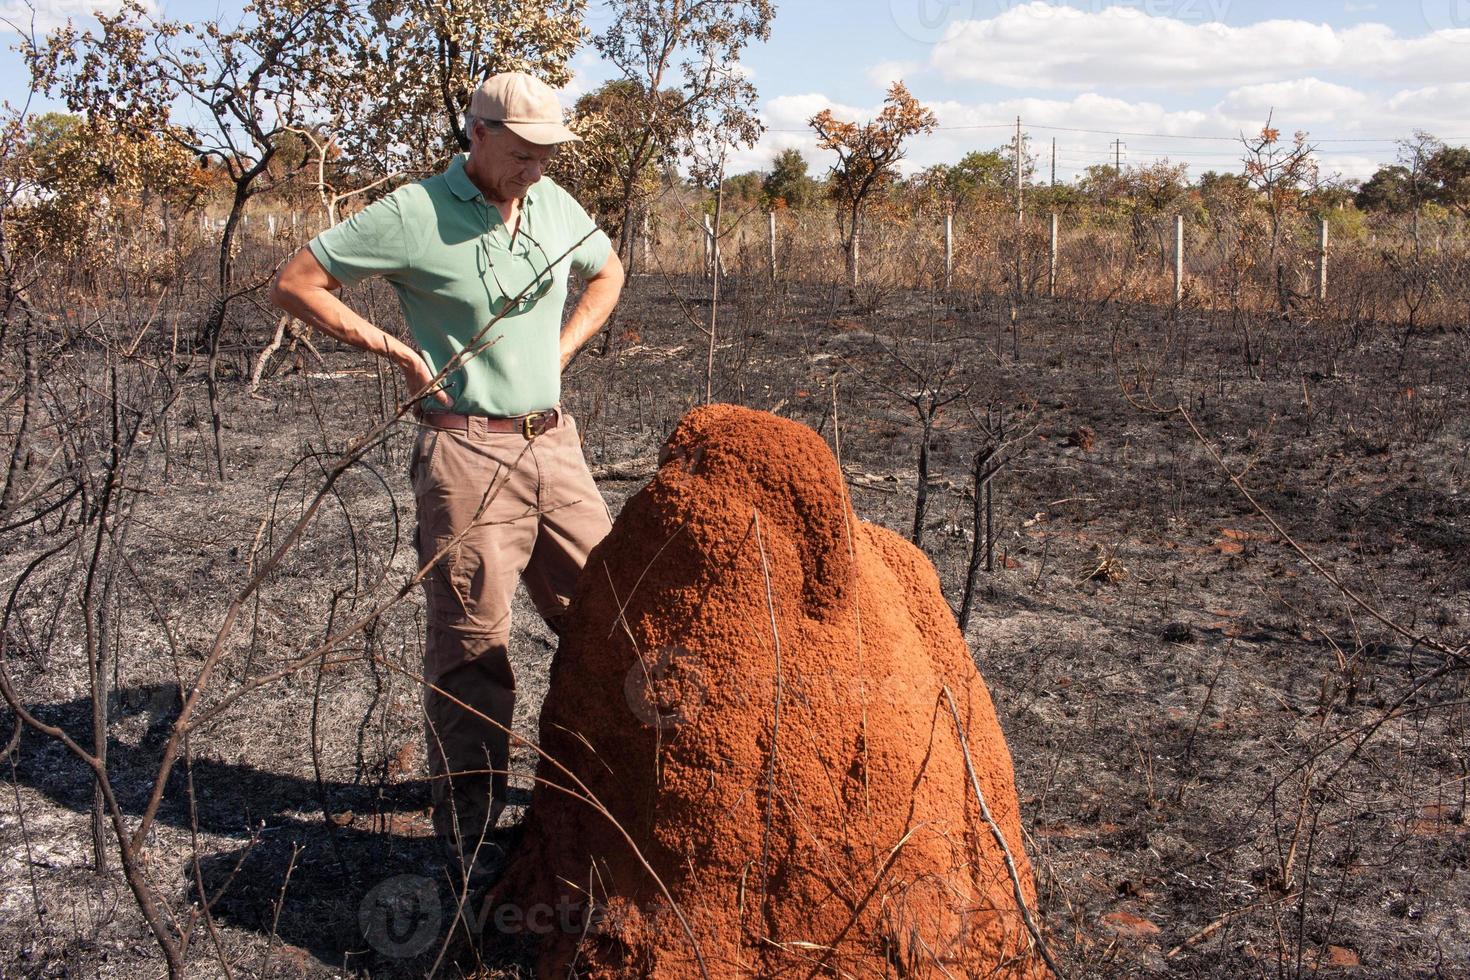 Man inspecting a termite mound near a piece of land that was set on fire near the Tuxa Indian Reservation in Northwest Brasilia, Brazil photo